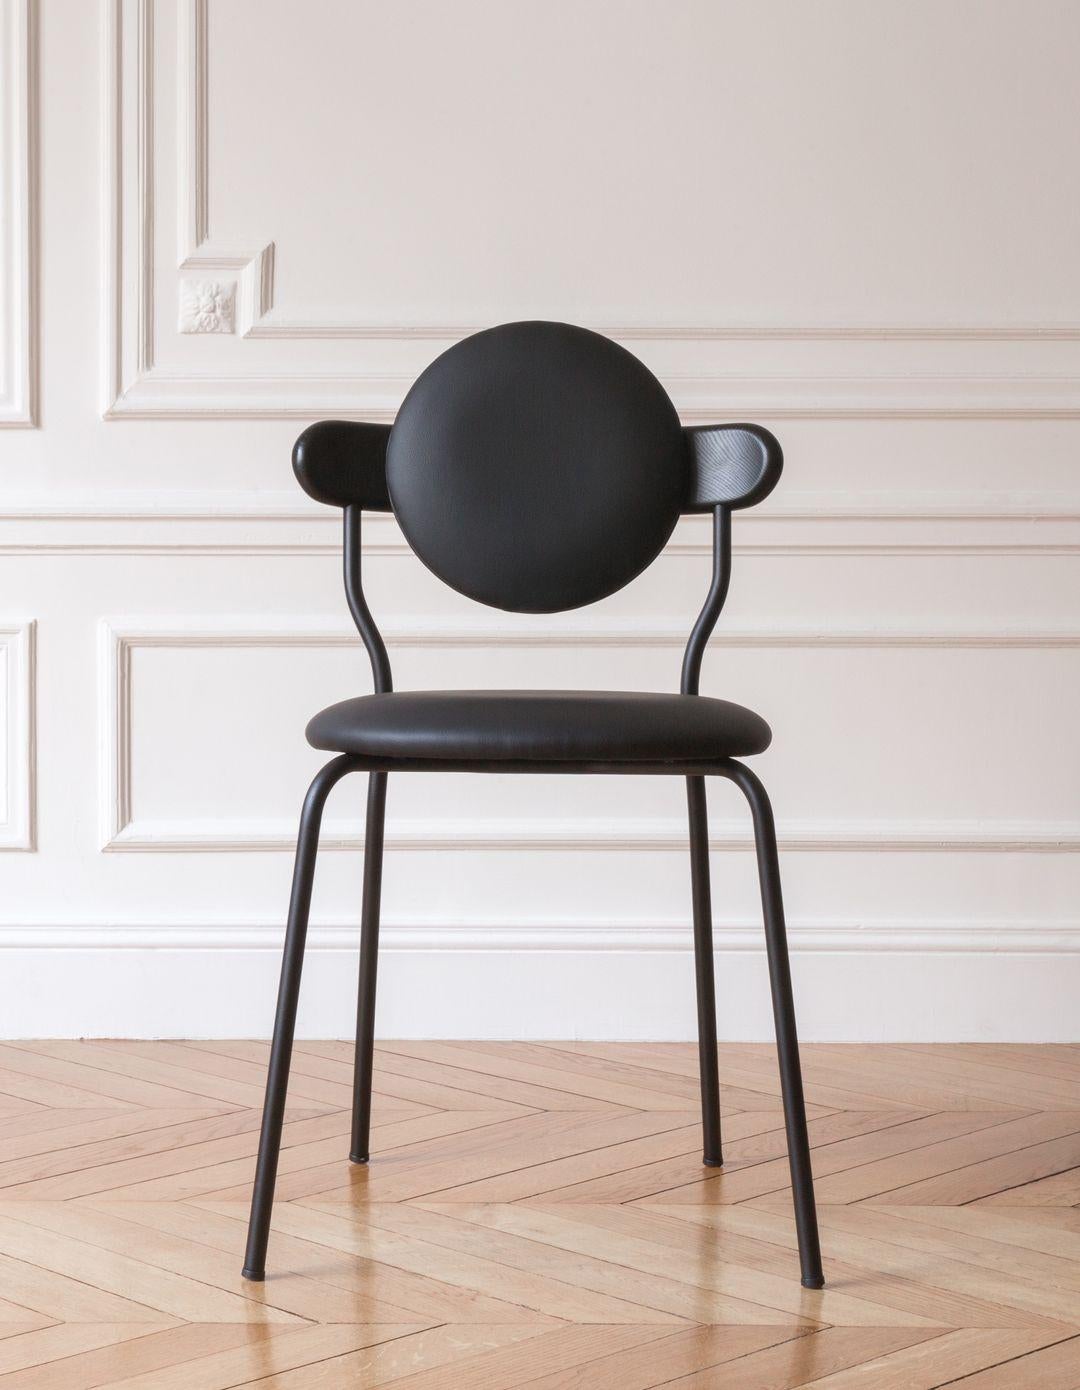 Planet is an upholstered chair inspired by the distinctive silhouette of planet Saturn. The upholstered seat and back ensures a high level of comfort, but Planet chair remains a featherweight at only six kilos for practical use every day.

It is